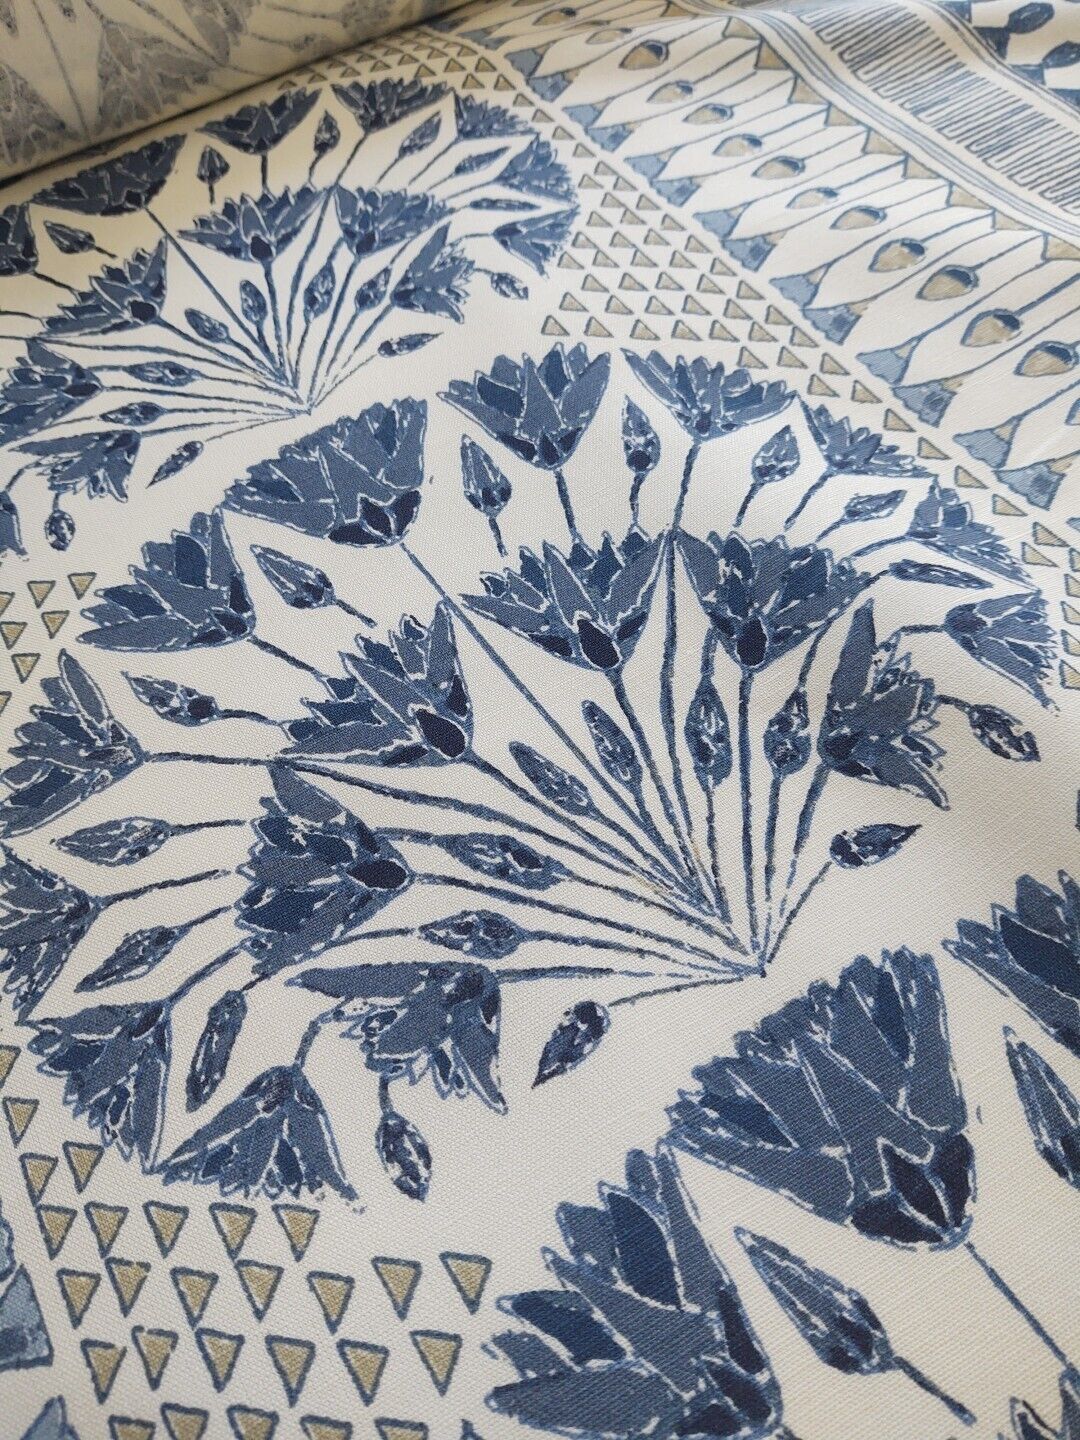 Thibaut Anna French “Cairo” Blue White Fabric Piece Buy by the Yard